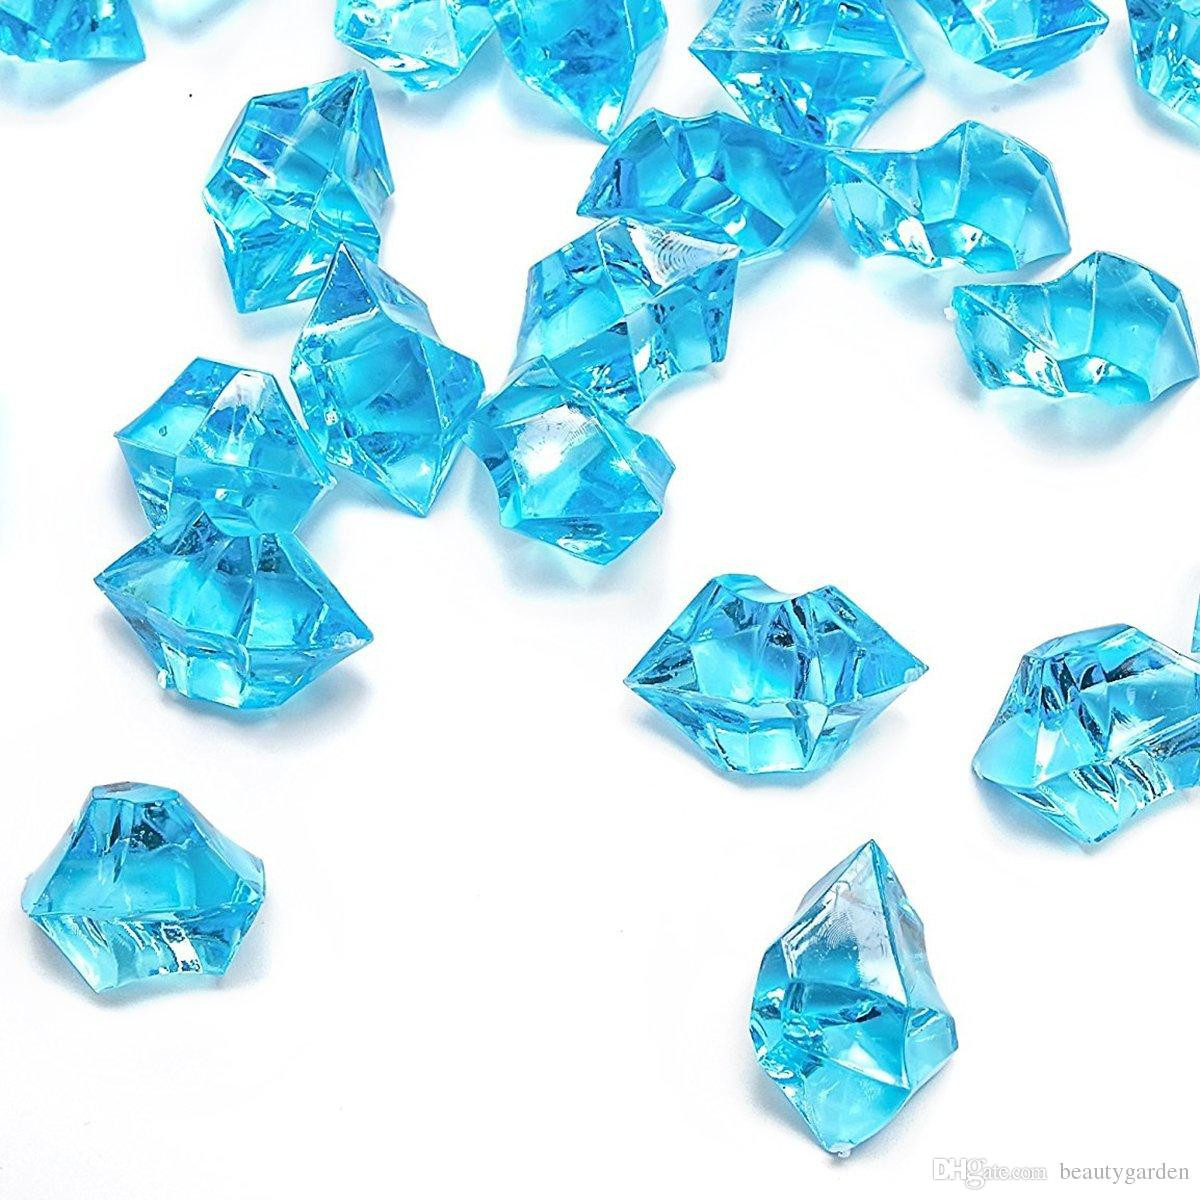 15 Unique Blue Glass Stones for Vases 2024 free download blue glass stones for vases of acrylic gems ice crystal rocks for vase fillers party table scatter throughout acrylic gems ice crystal rocks for vase fillers party table scatter wedding phot